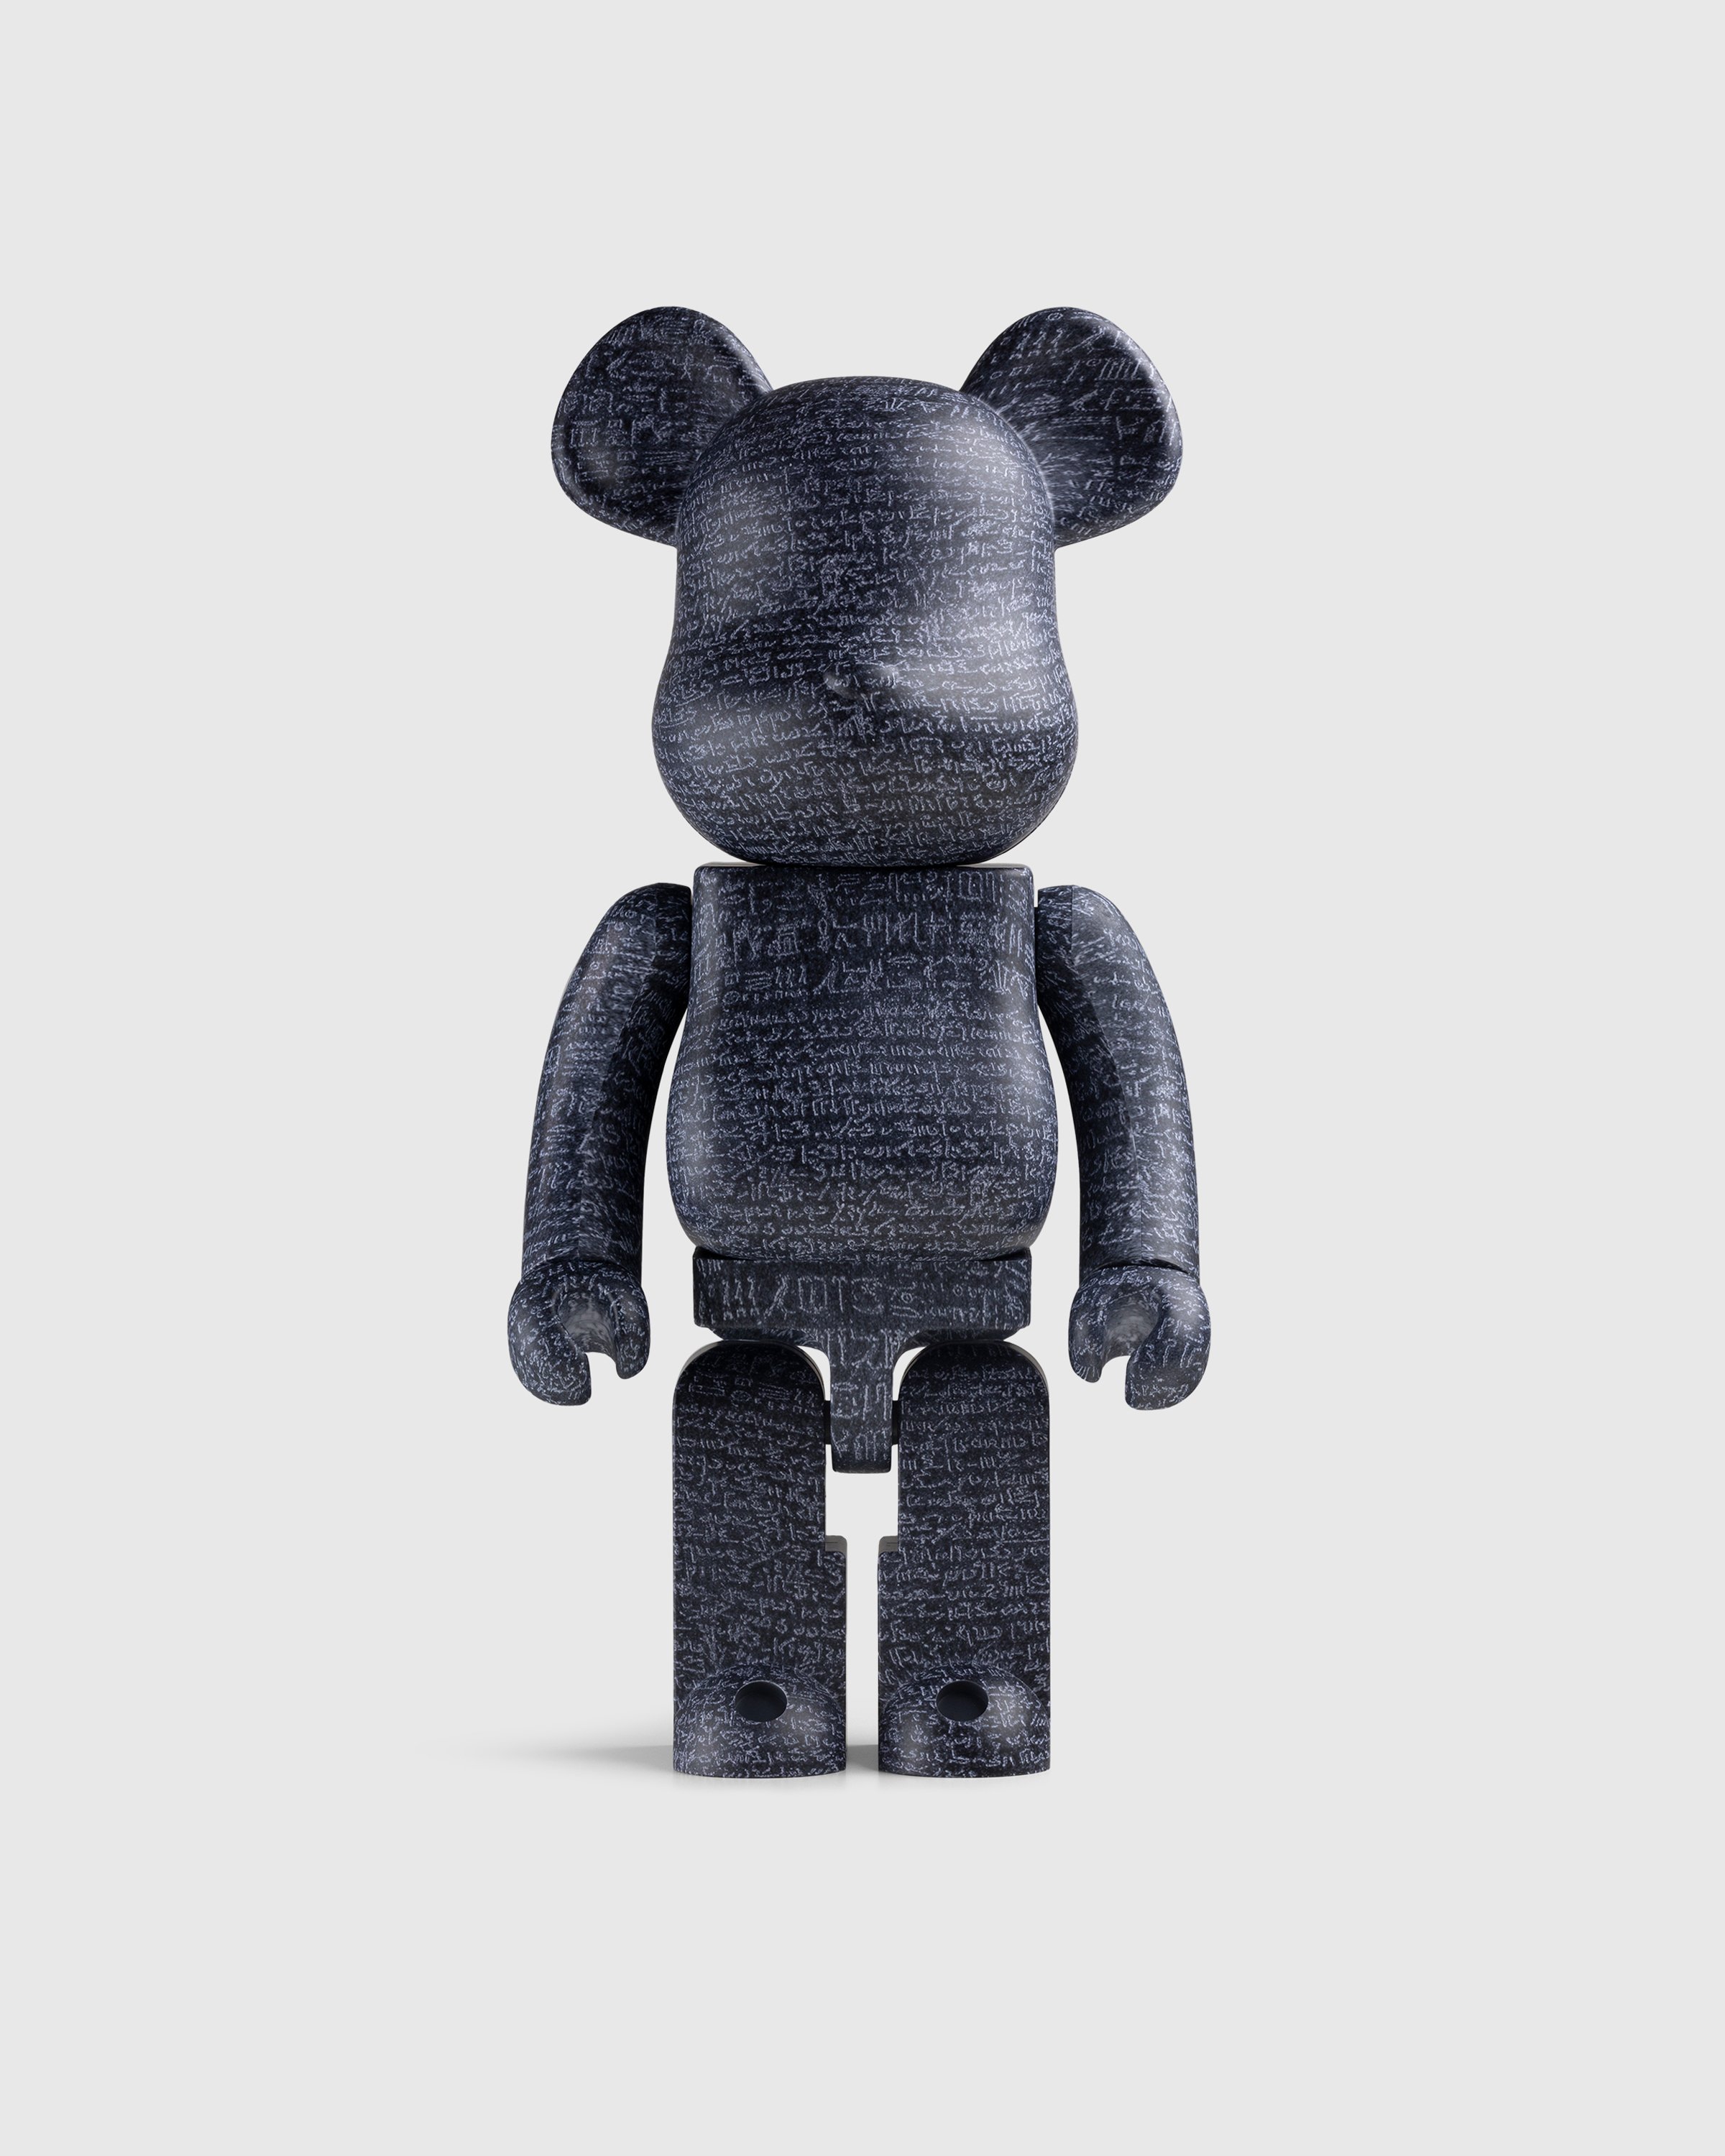 The British Museum BE@RBRICK "Tomb-Paint